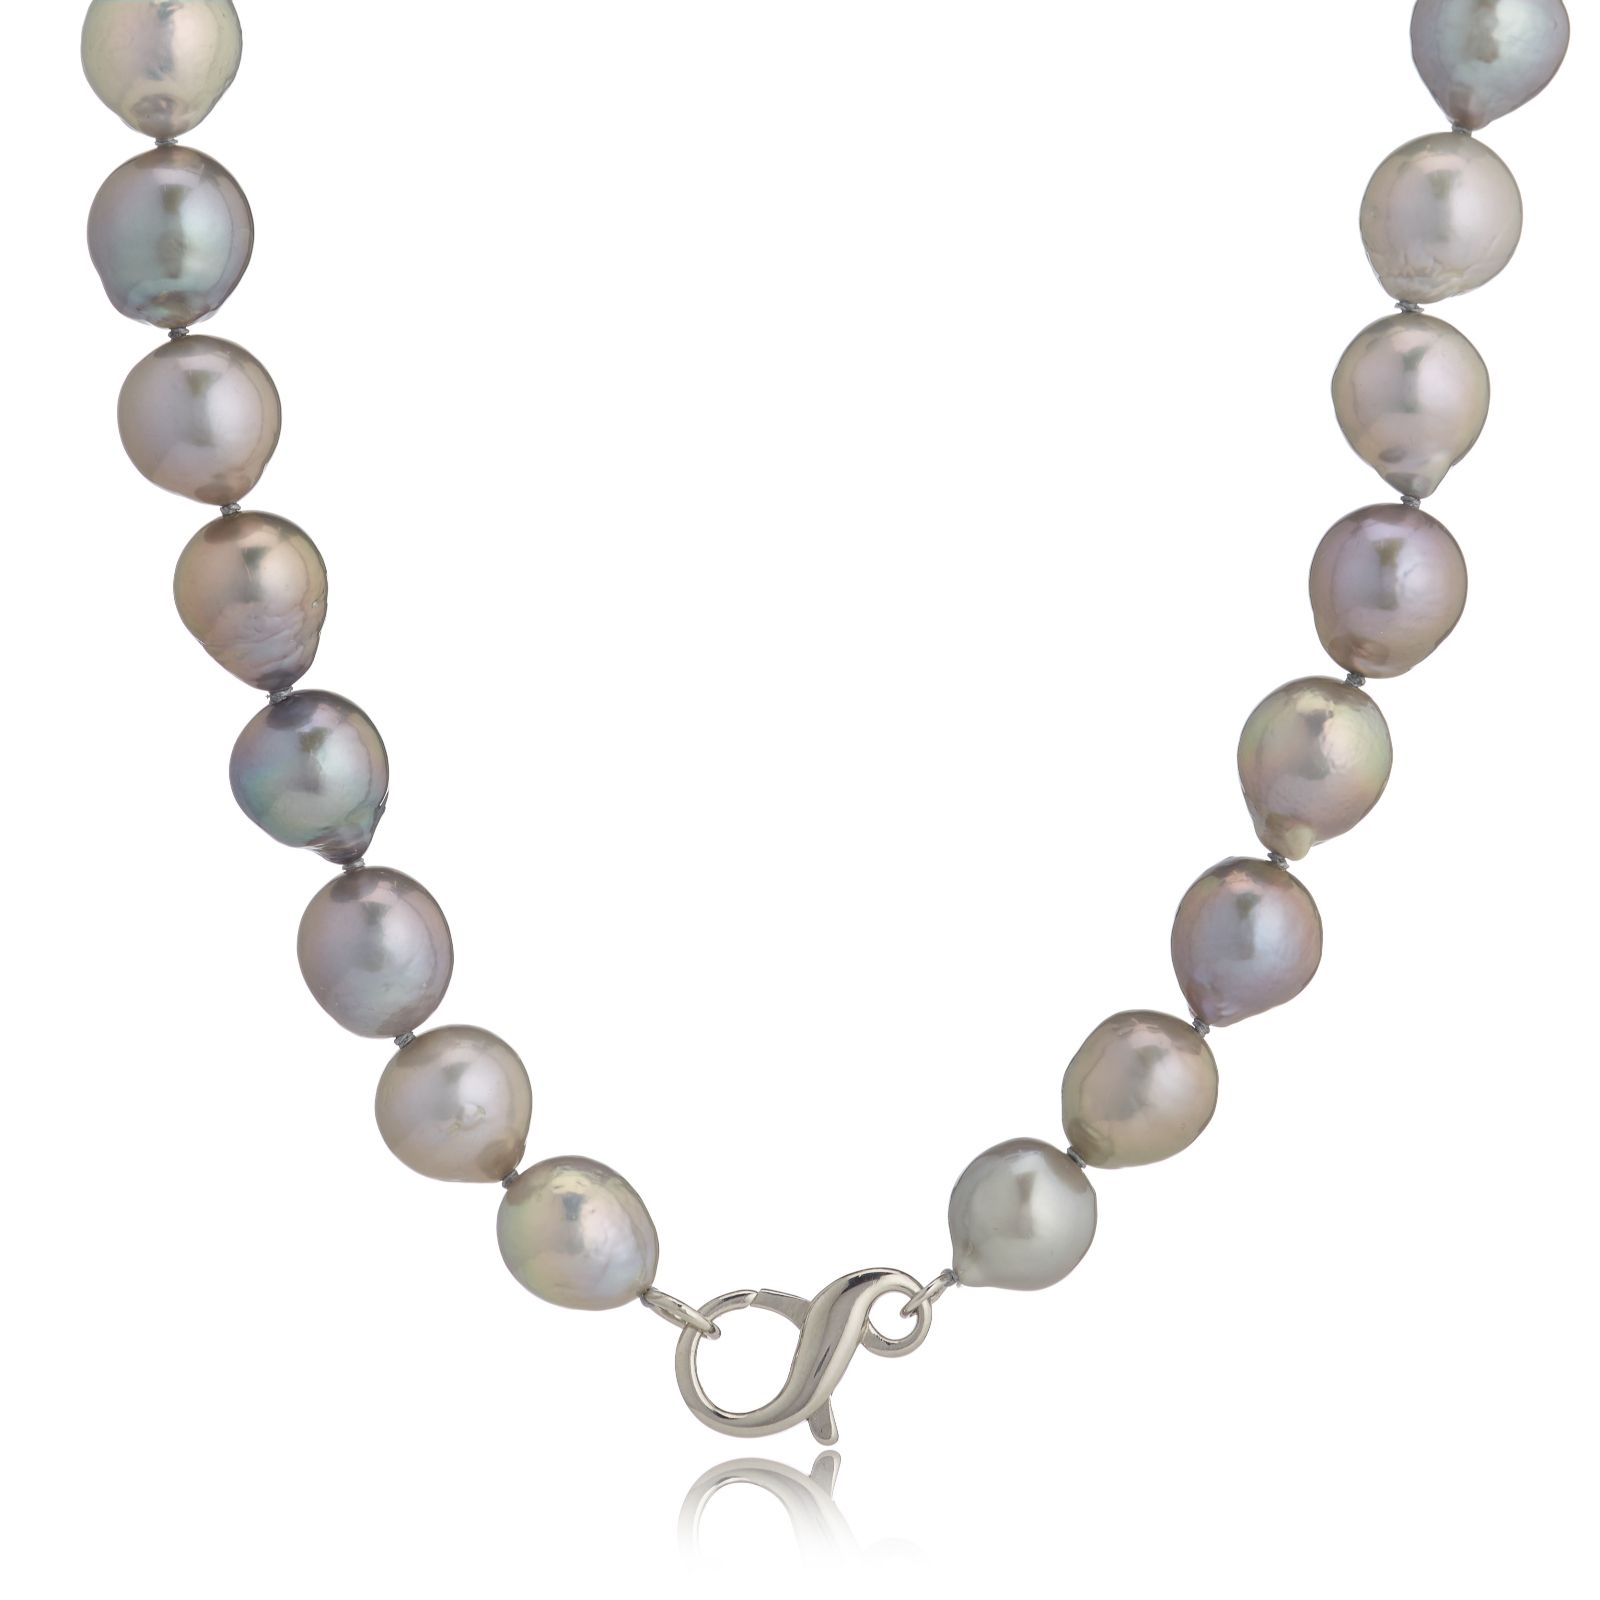 Lara Pearl 10-13mm Ming Baroque Strand 50cm Necklace Sterling Silver ...